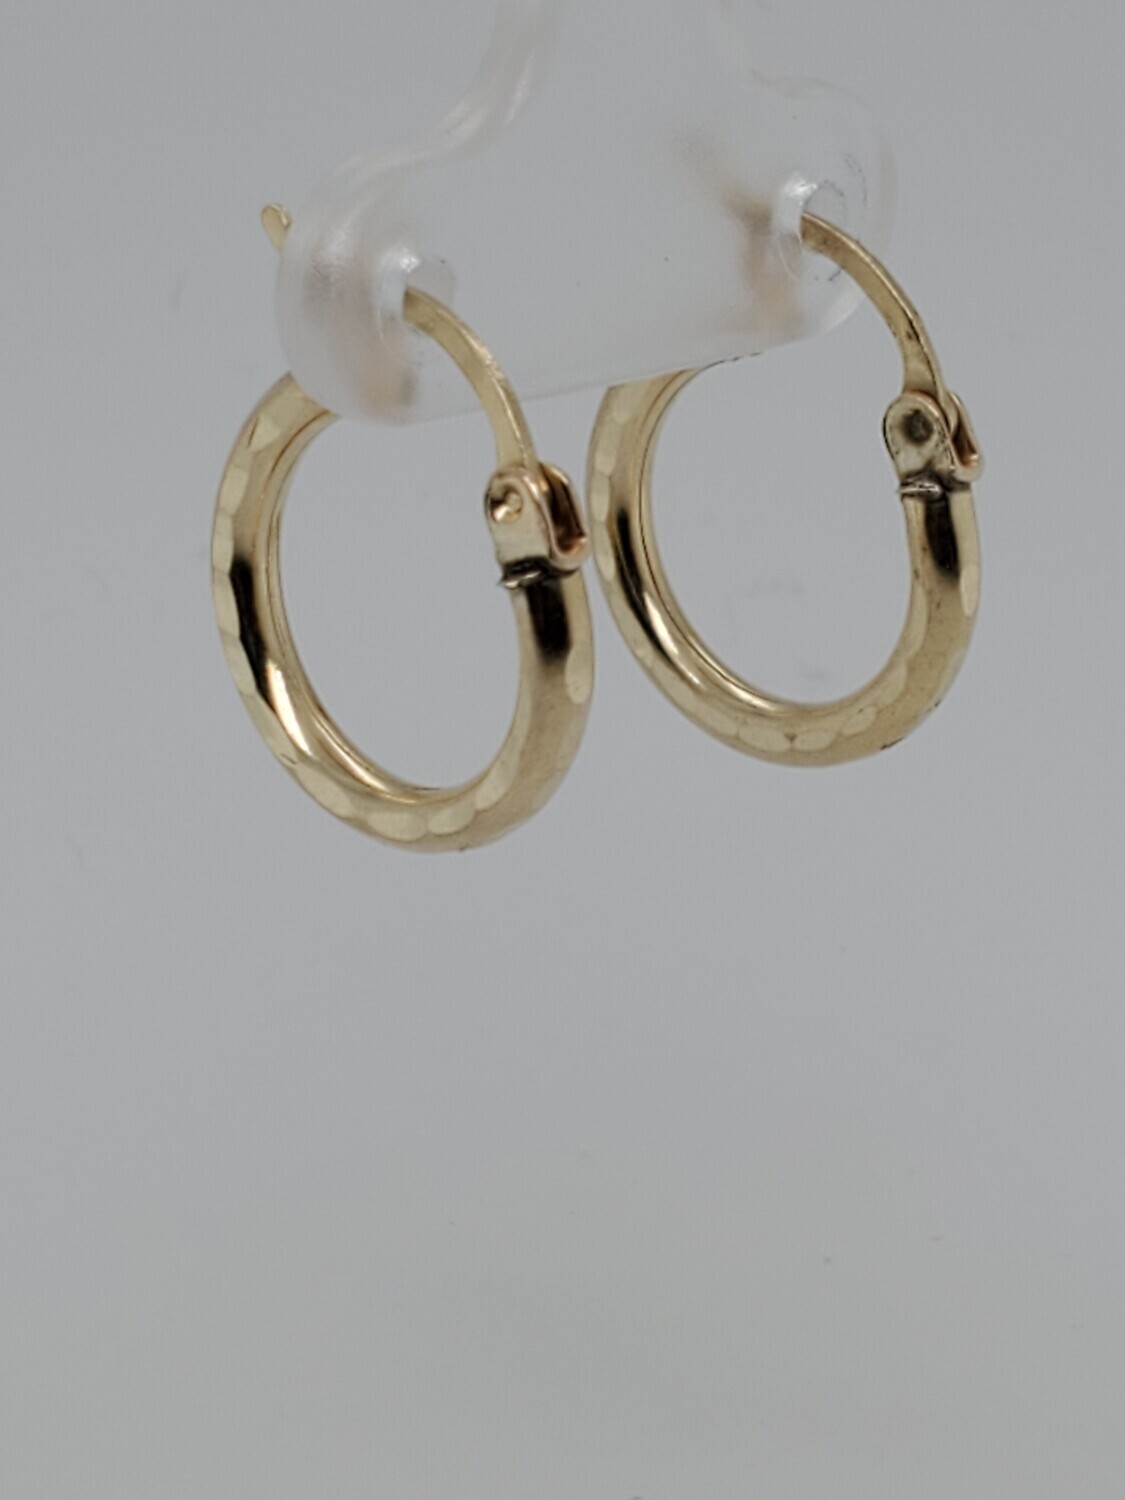 BRAND NEW!! 14KT SMALL HOLLOW HOOPS INVENTORY # I-18312 75TH AVE